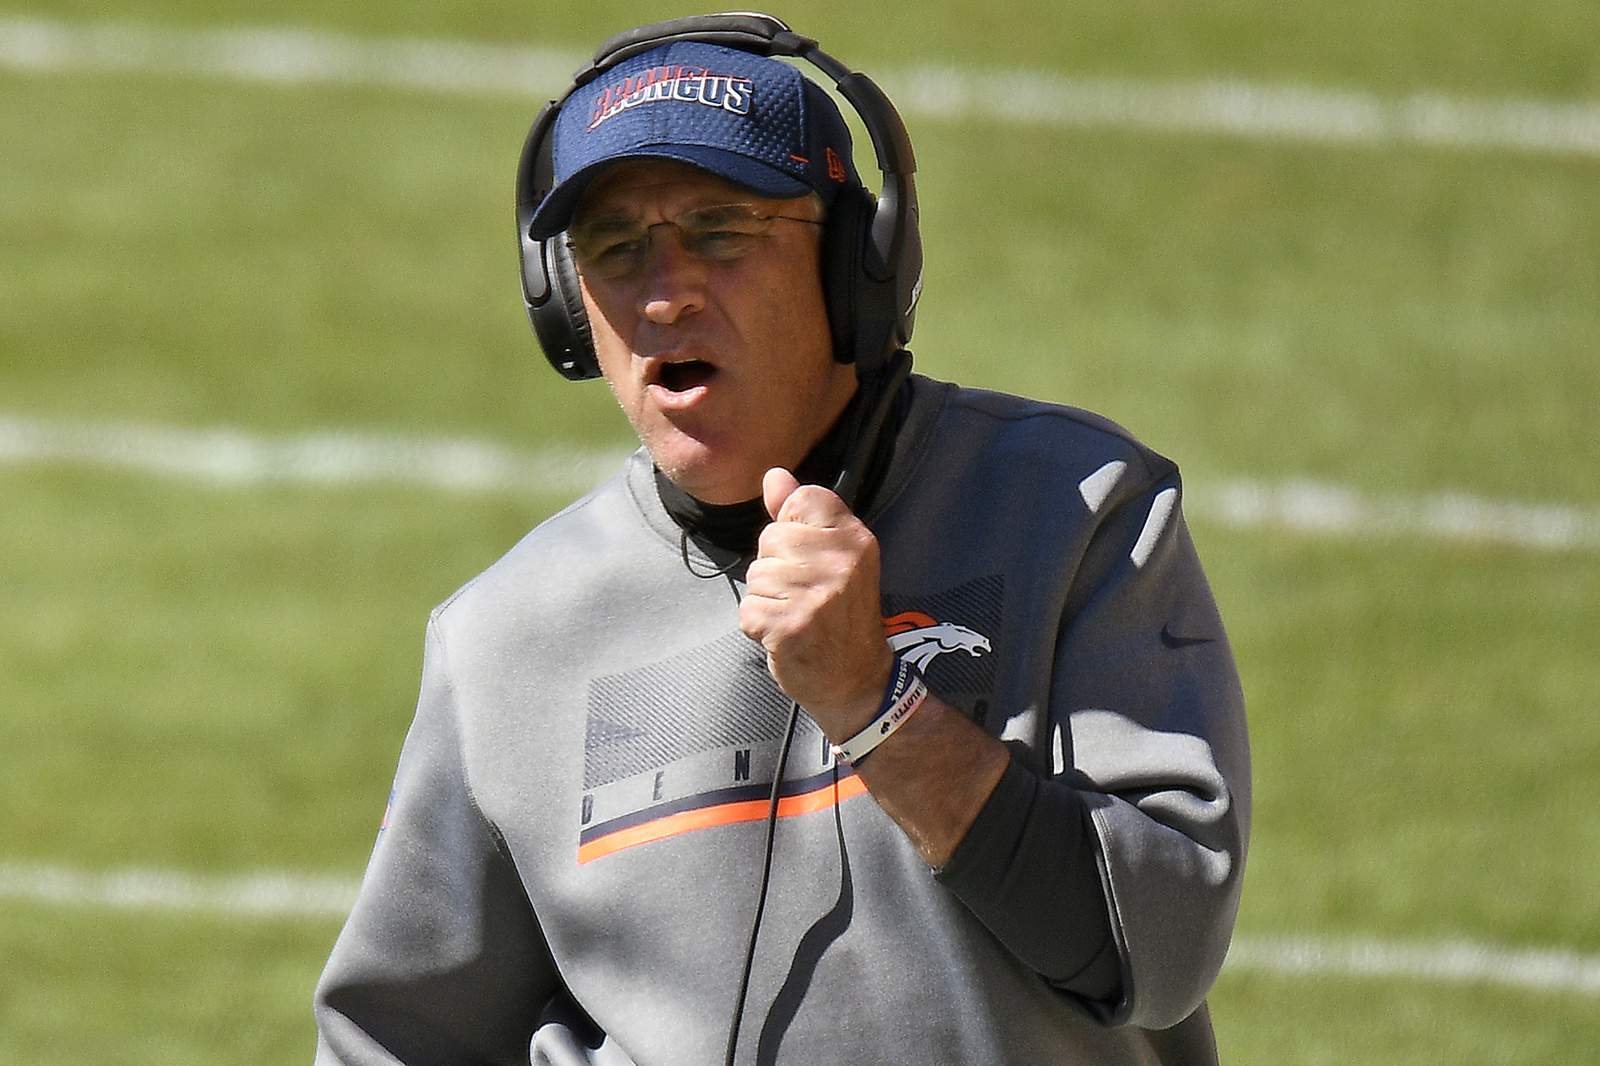 Broncos coach: virus outbreak shows who the 'whiners are'